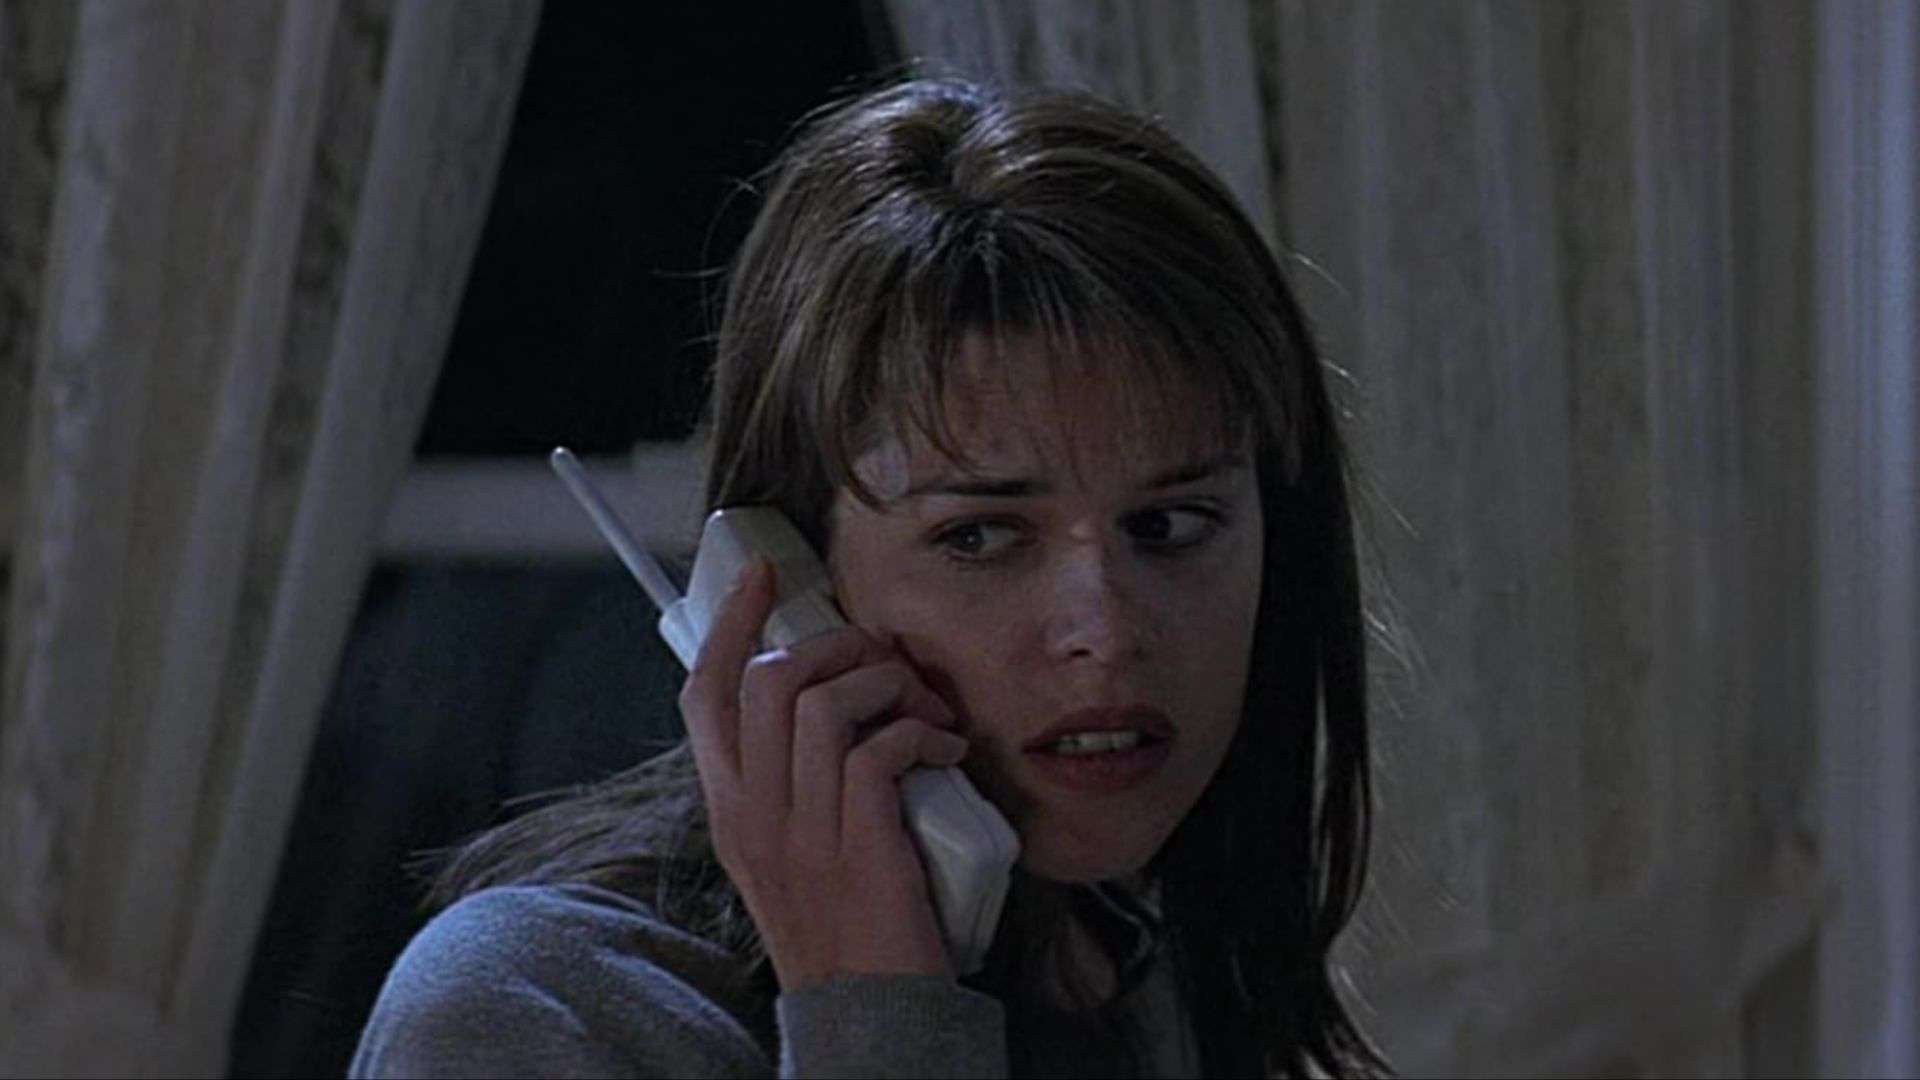 A woman looks over her shoulder on the phone in this image from Woods Entertainment.